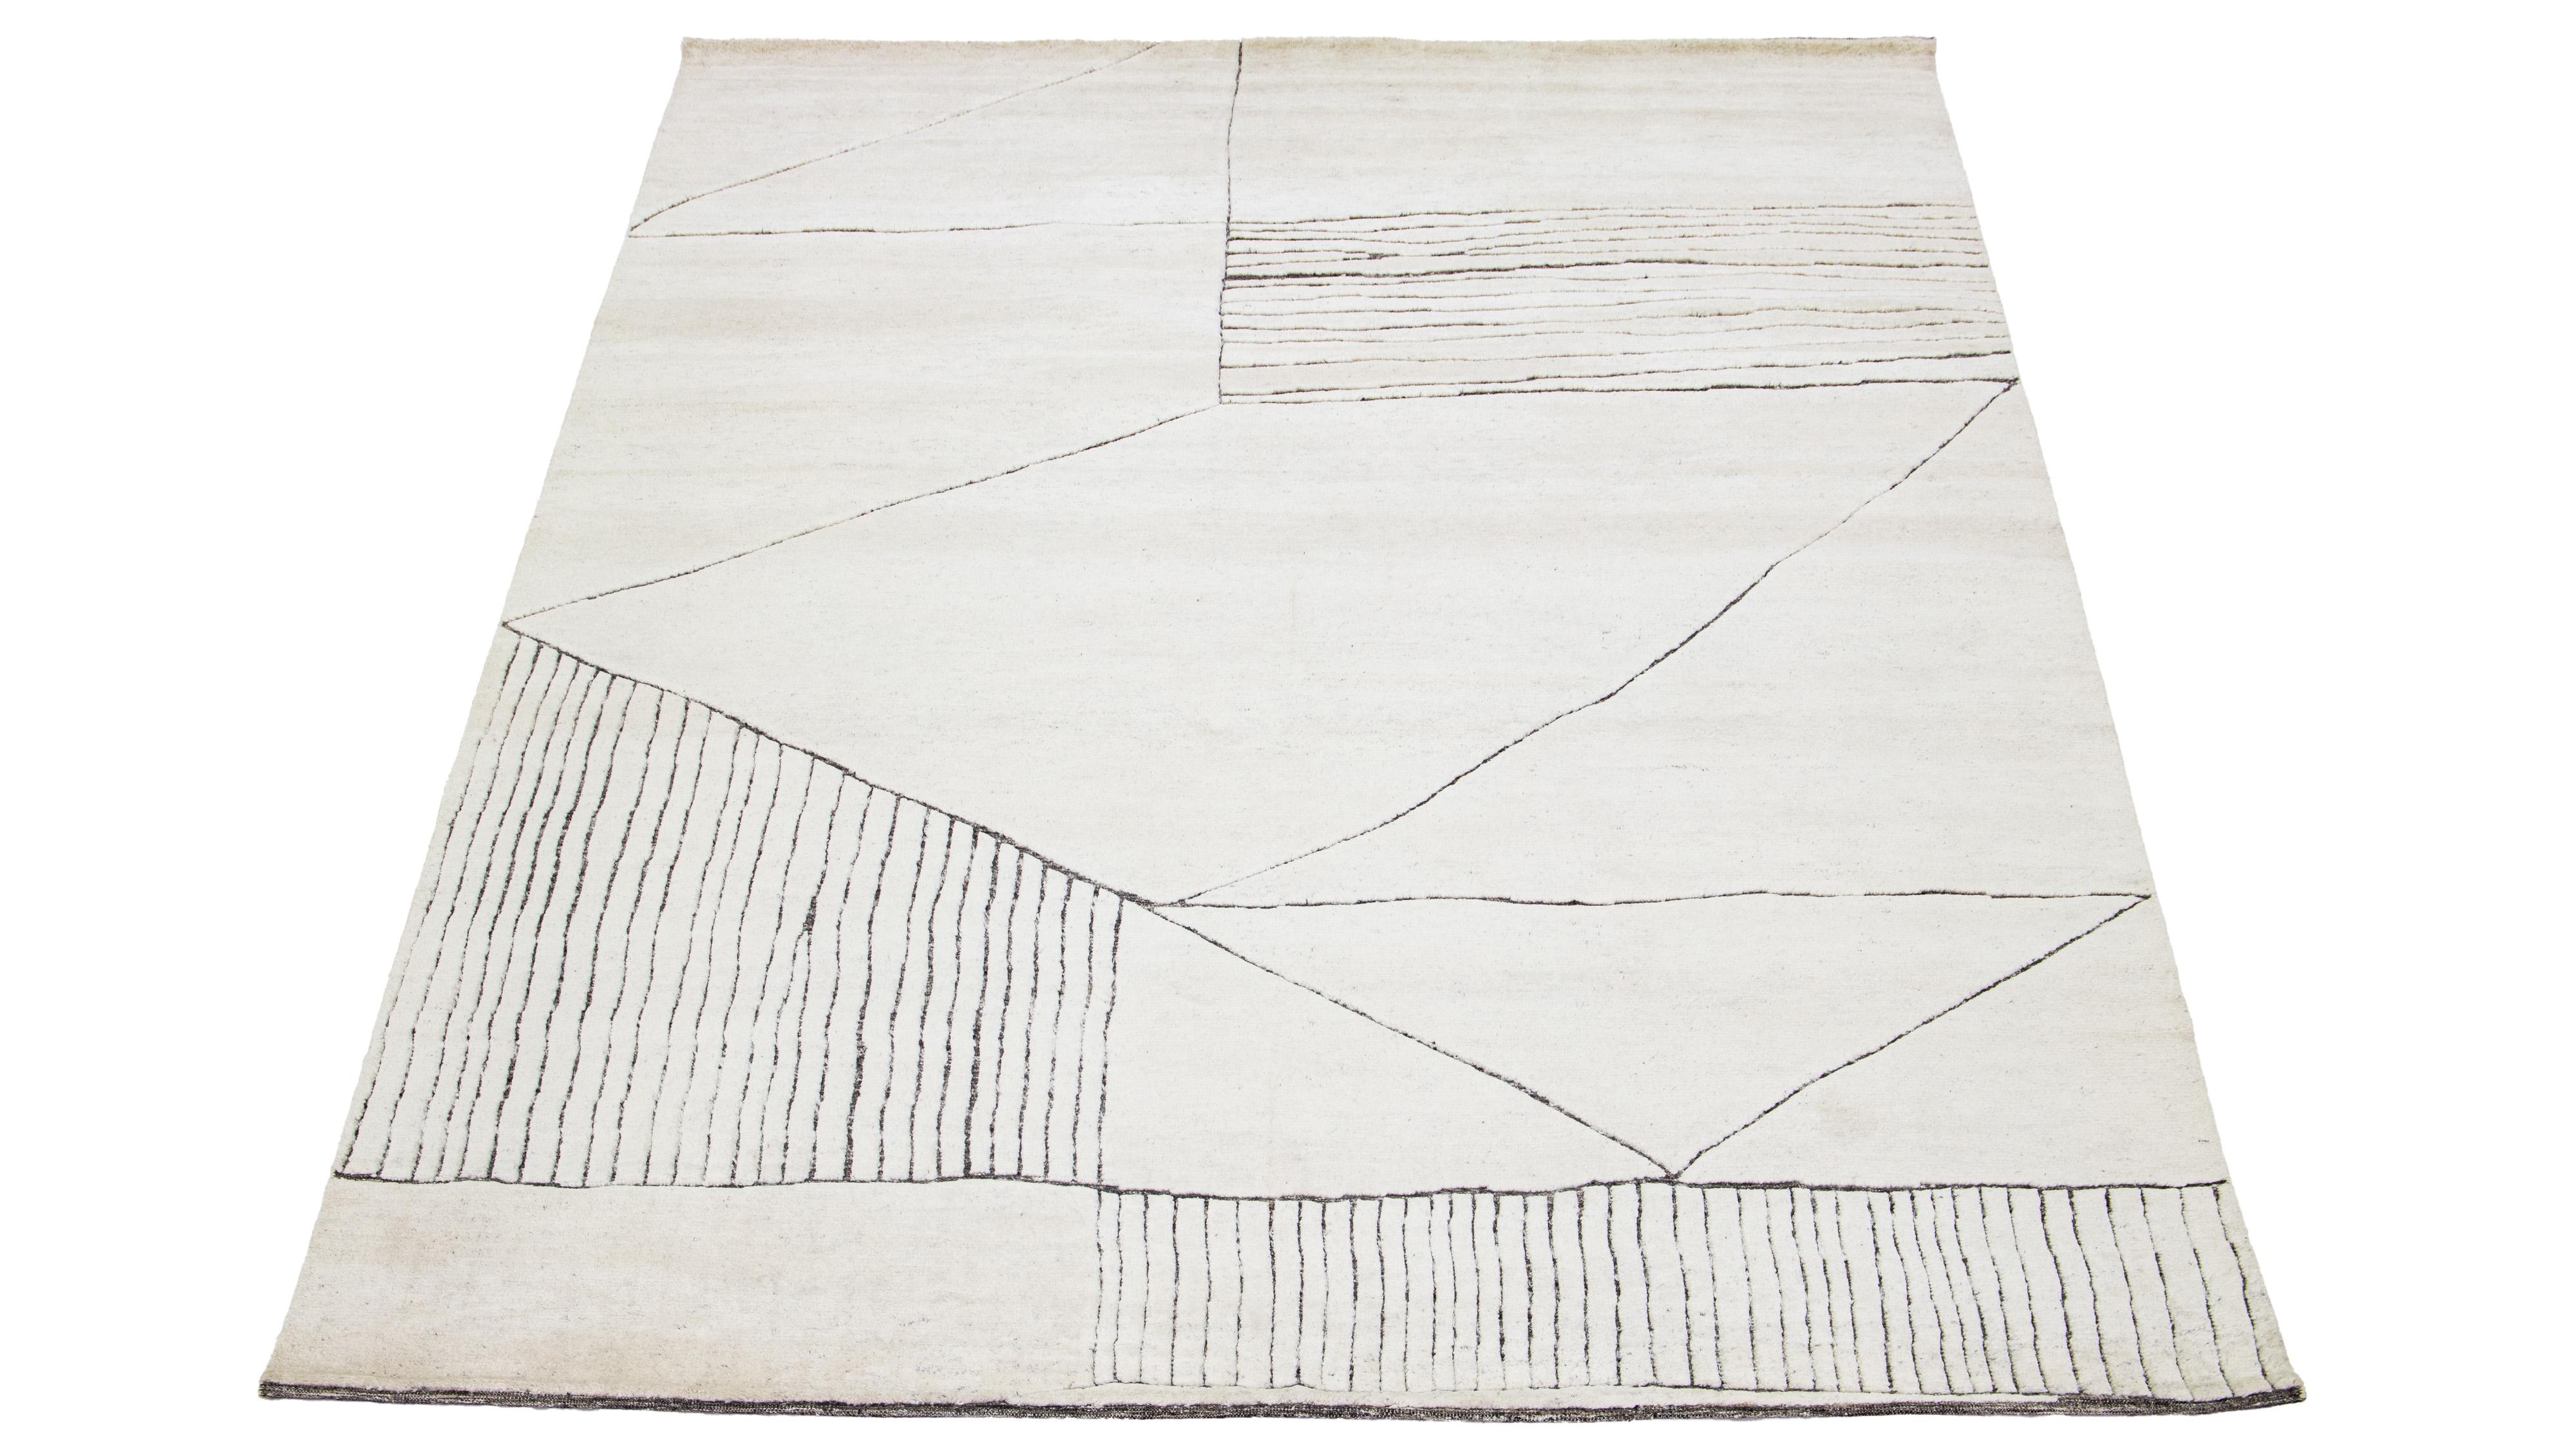 This luxurious wool rug features a timeless Moroccan pattern in a contemporary abstract Minimalist style, utilizing Ivory tones to create a sleek and modern look. It is crafted using traditional hand-knotting techniques, ensuring exceptional quality